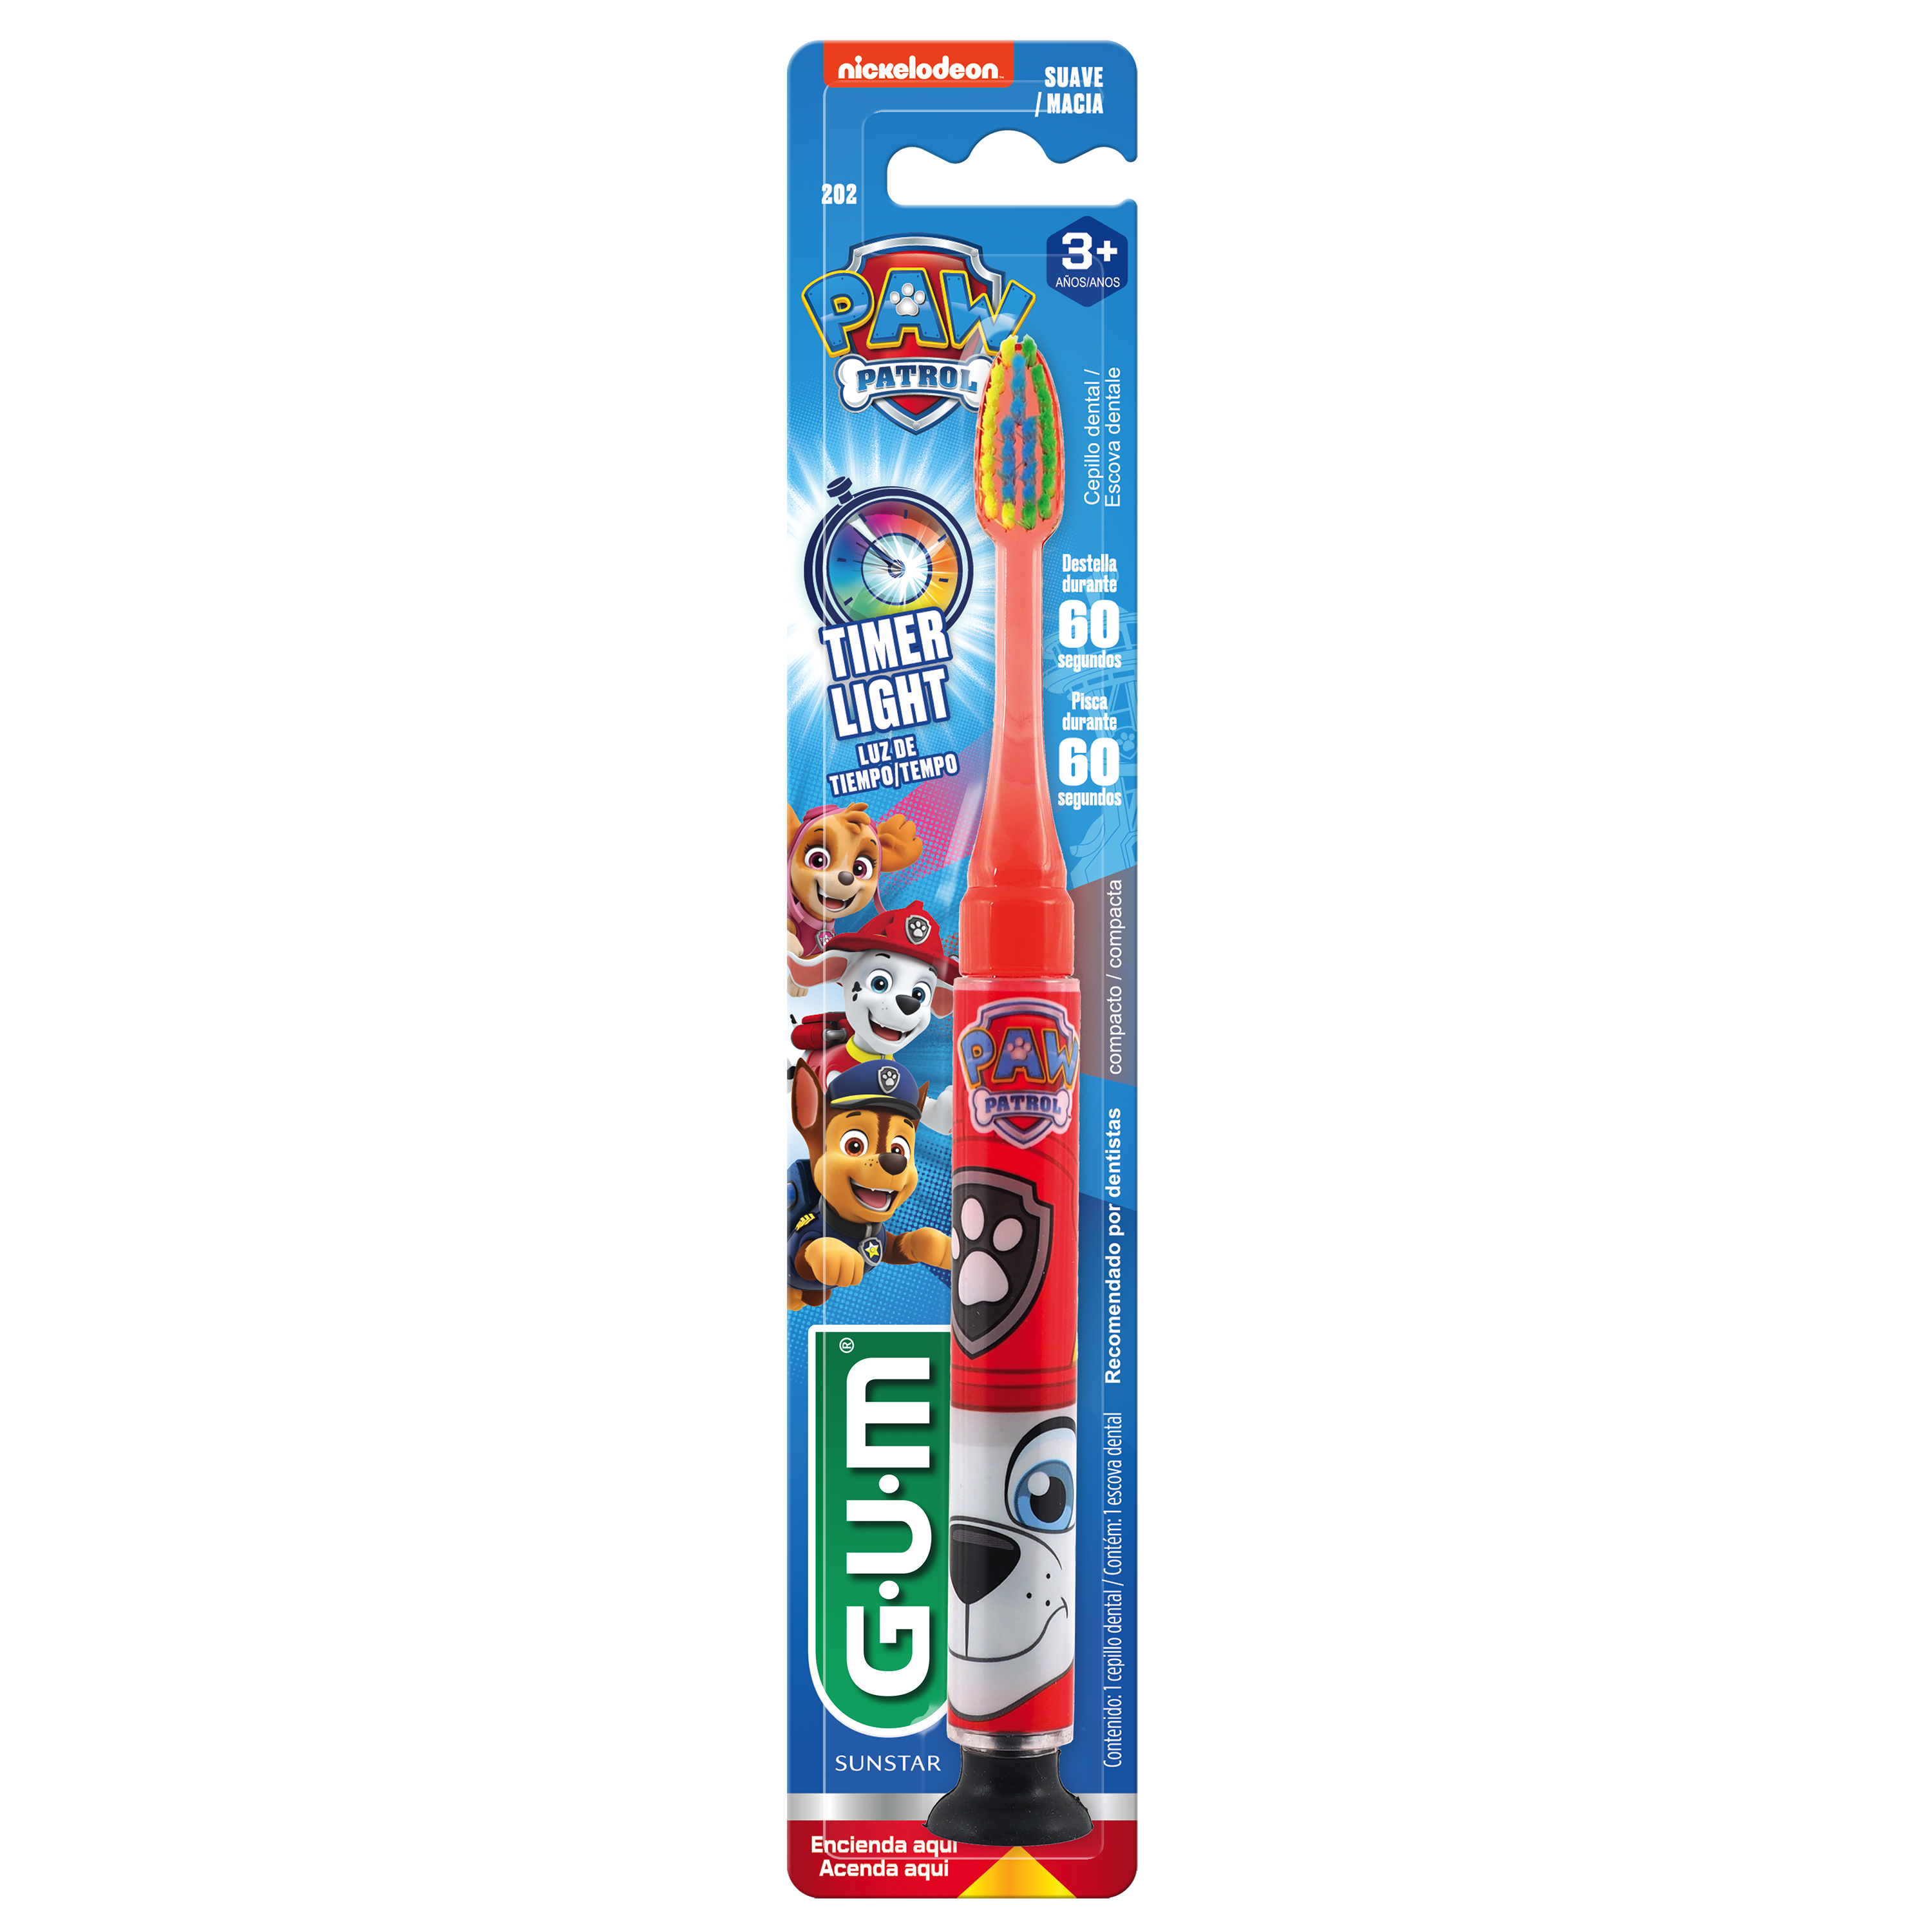 202PPY-Product-Packaging-Toothbrush-PAWPatrol-Lightup-front-Marshall-1ct.png